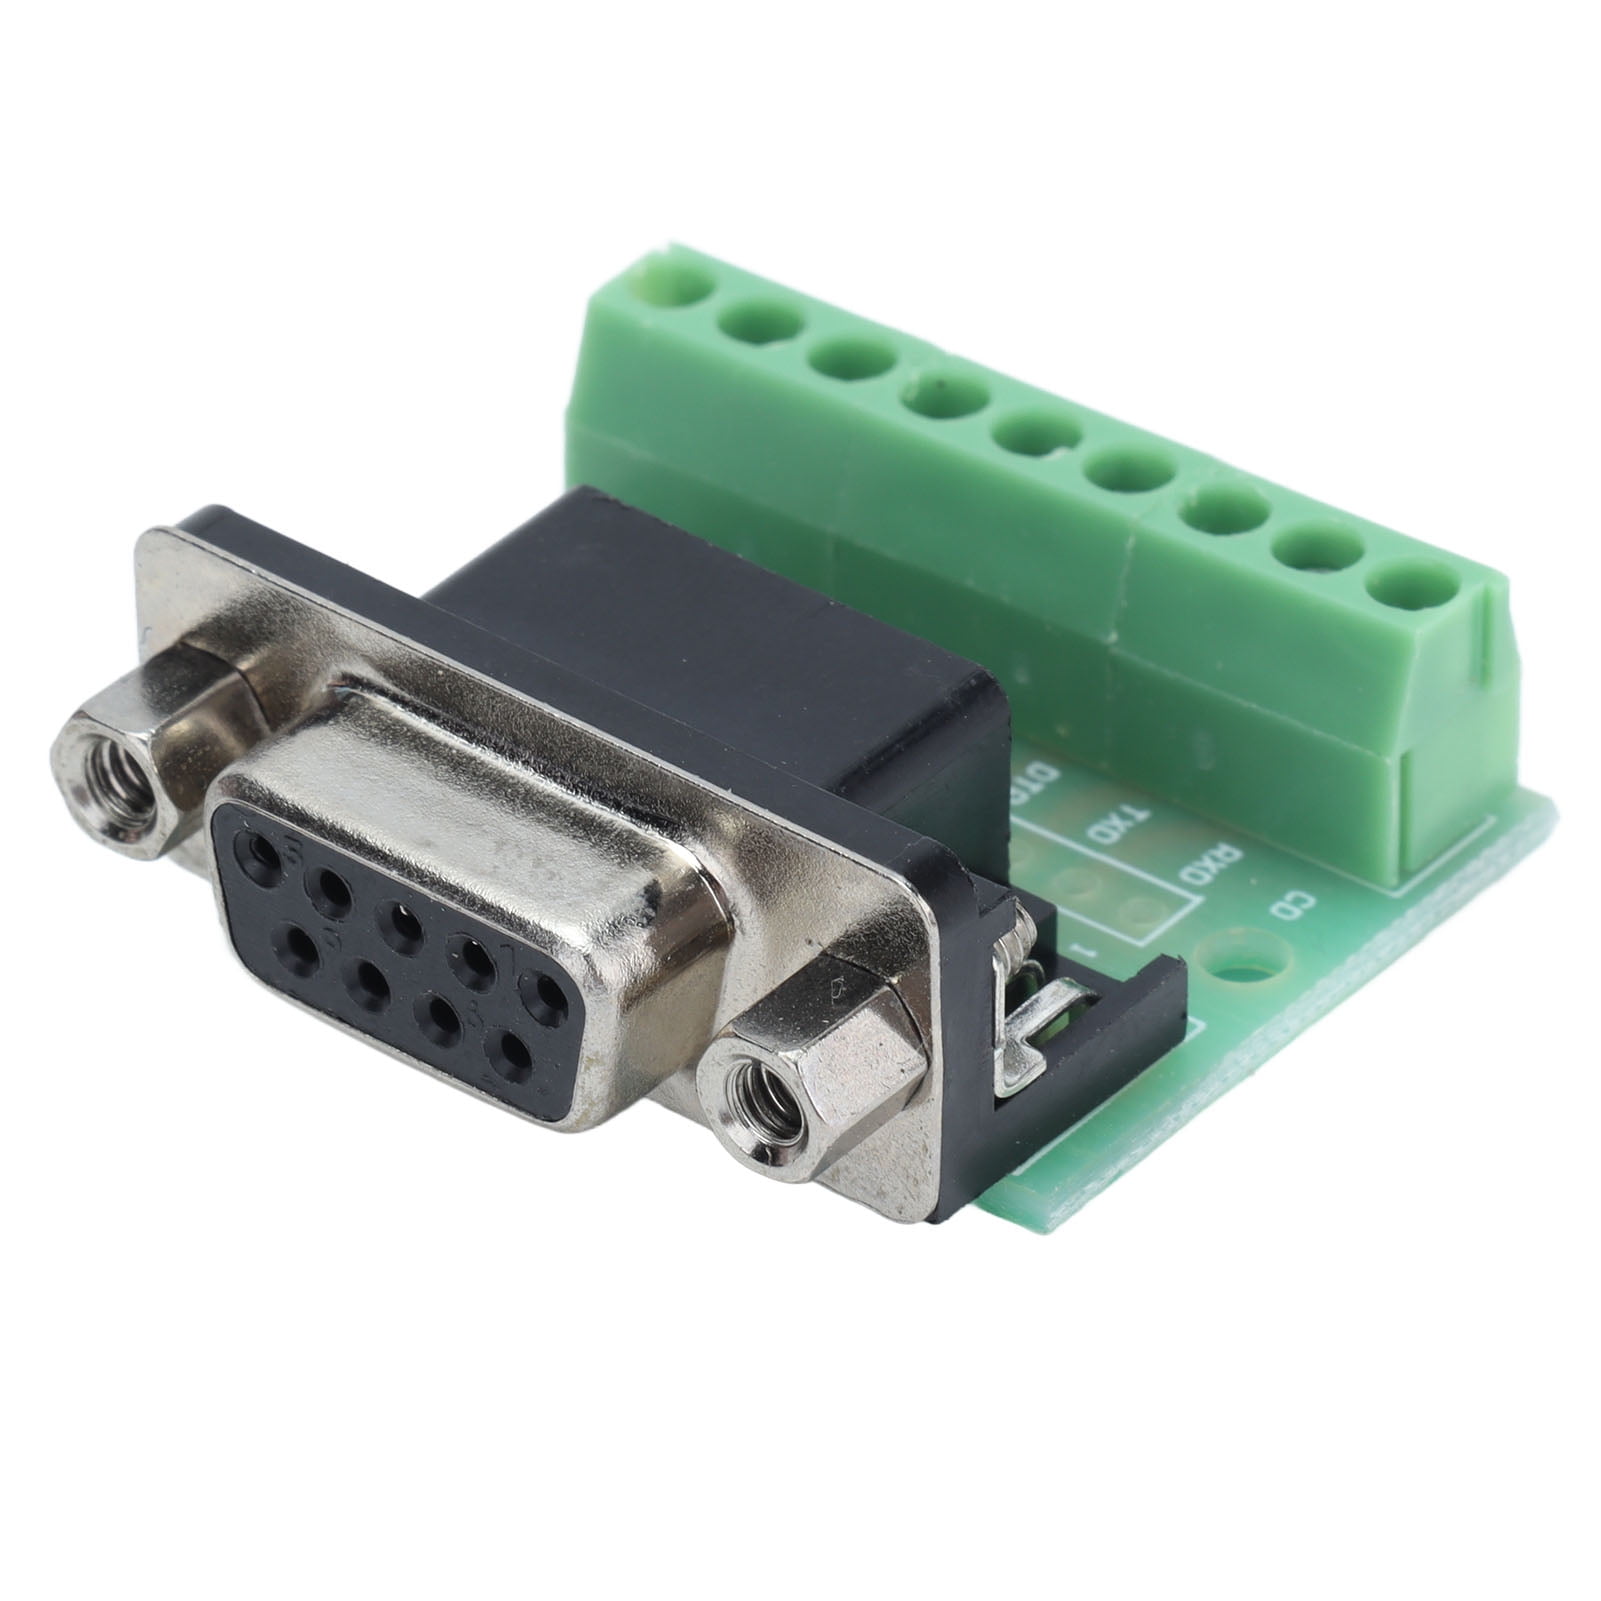 DB9 Male Cable End Terminal Block Breakout Board serial port RS232 485 Ship free